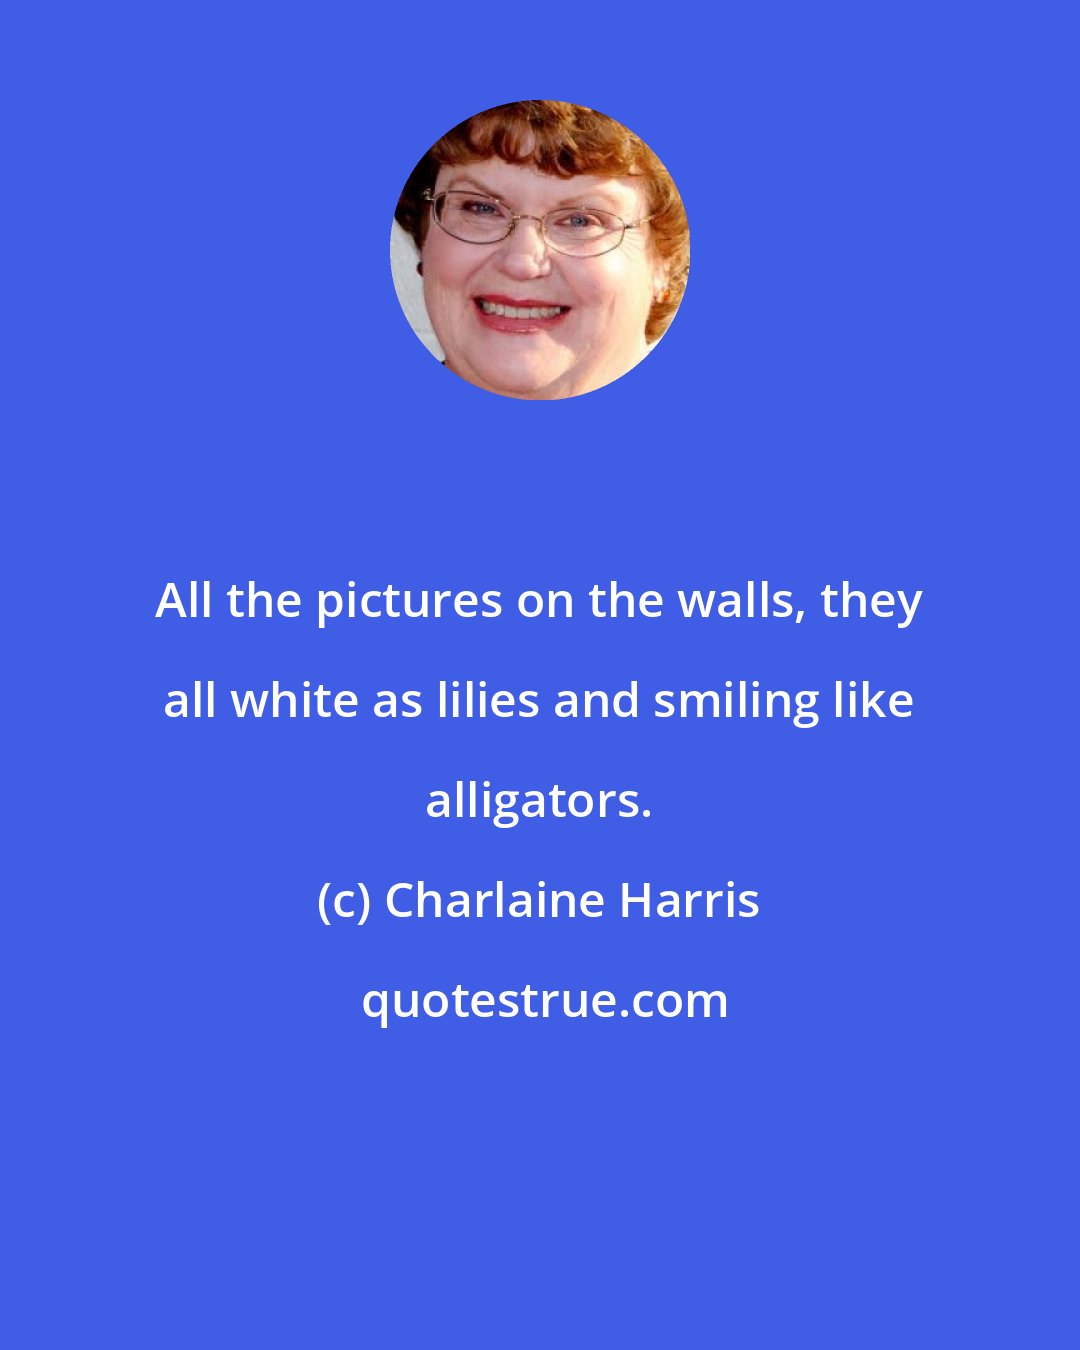 Charlaine Harris: All the pictures on the walls, they all white as lilies and smiling like alligators.